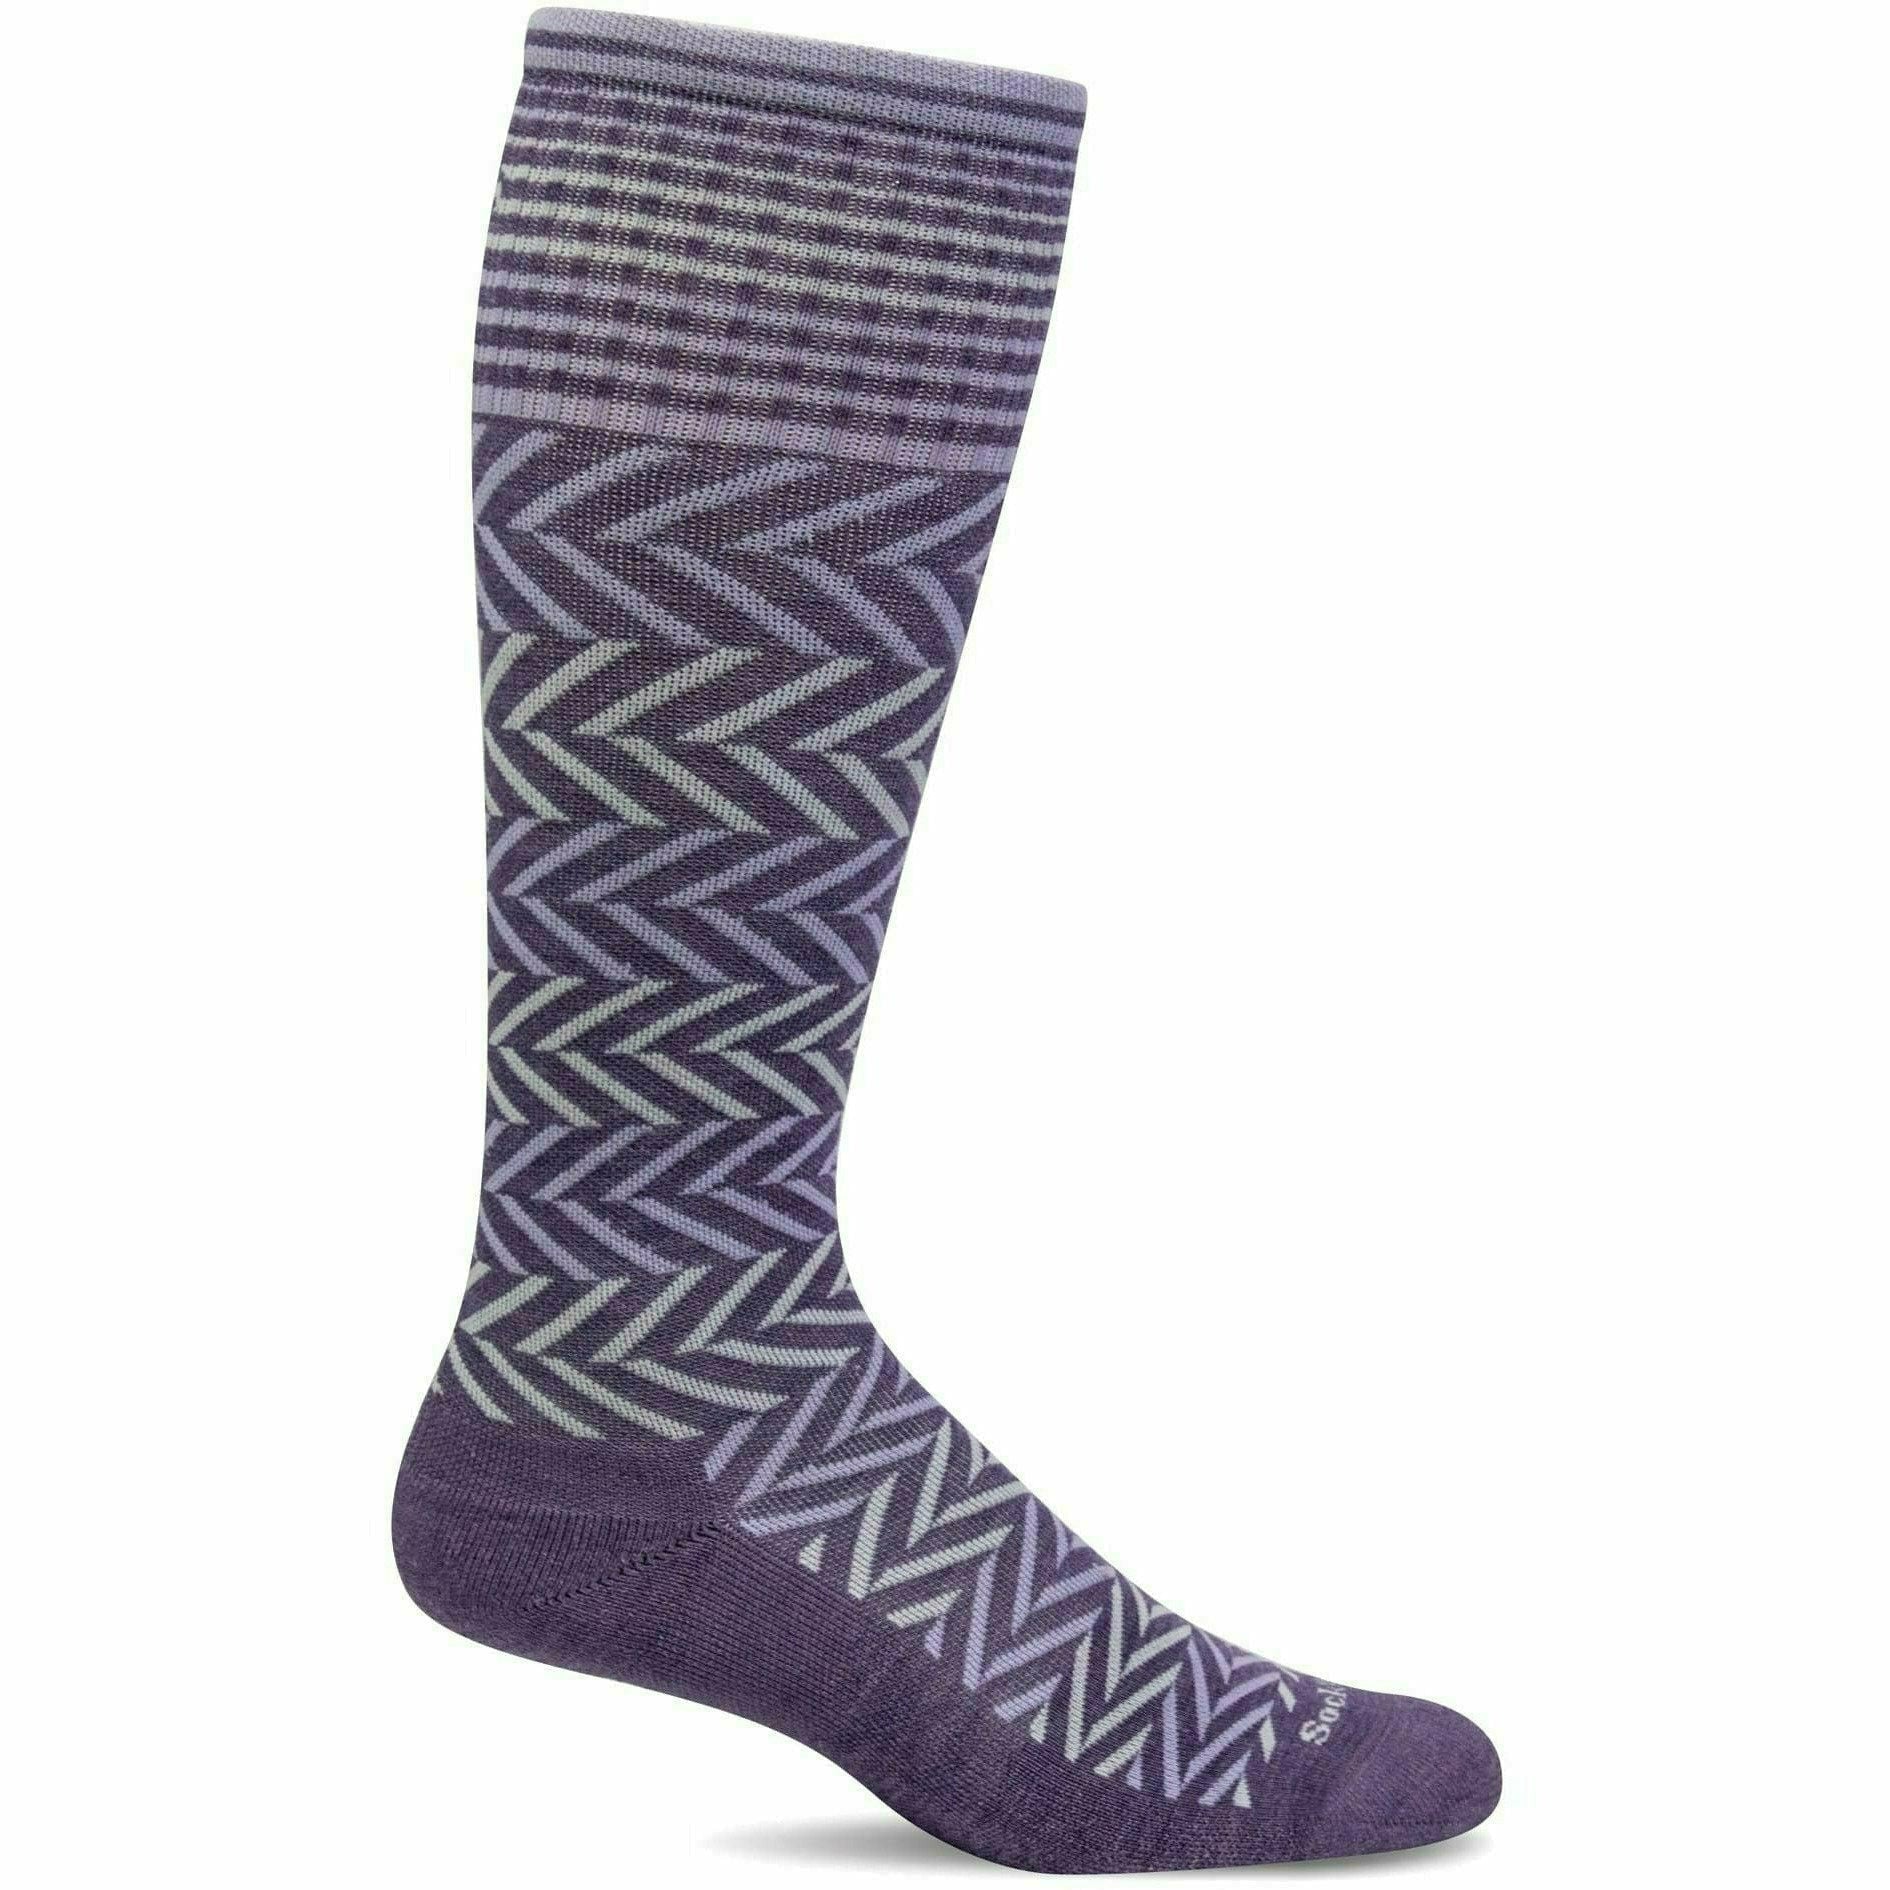 Home / Products / Sockwell Womens Chevron Moderate Compression Knee ...